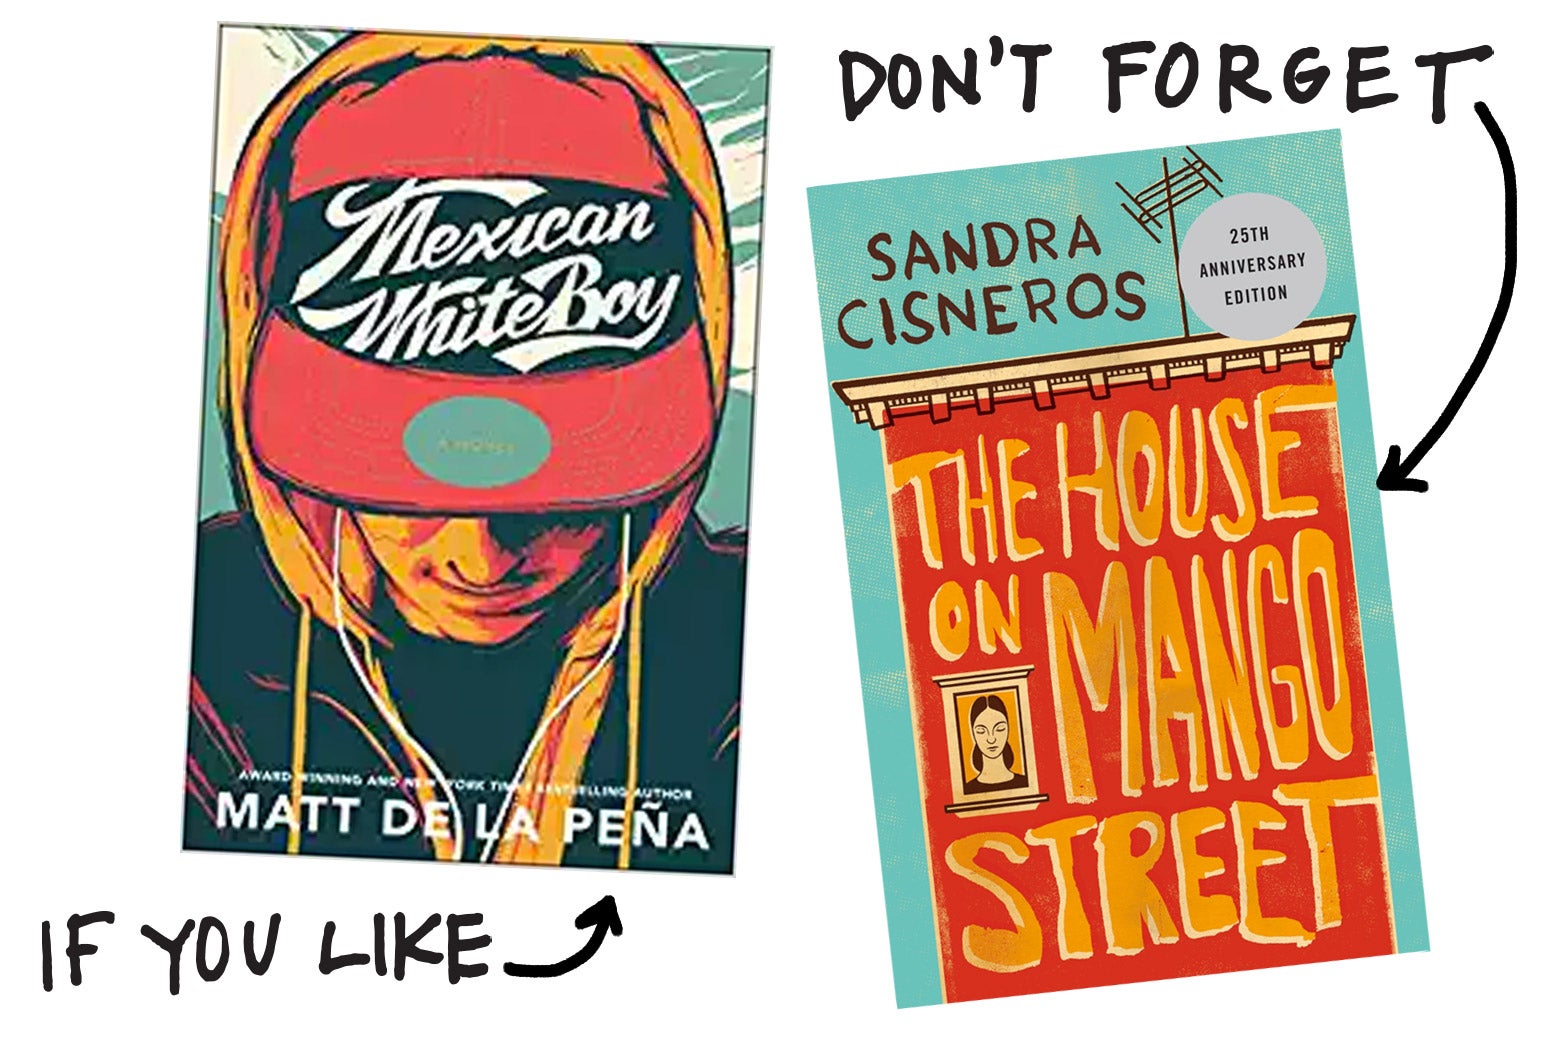 If you like Mexican WhiteBoy, don't forget The House on Mango Street by Sandra Cisneros